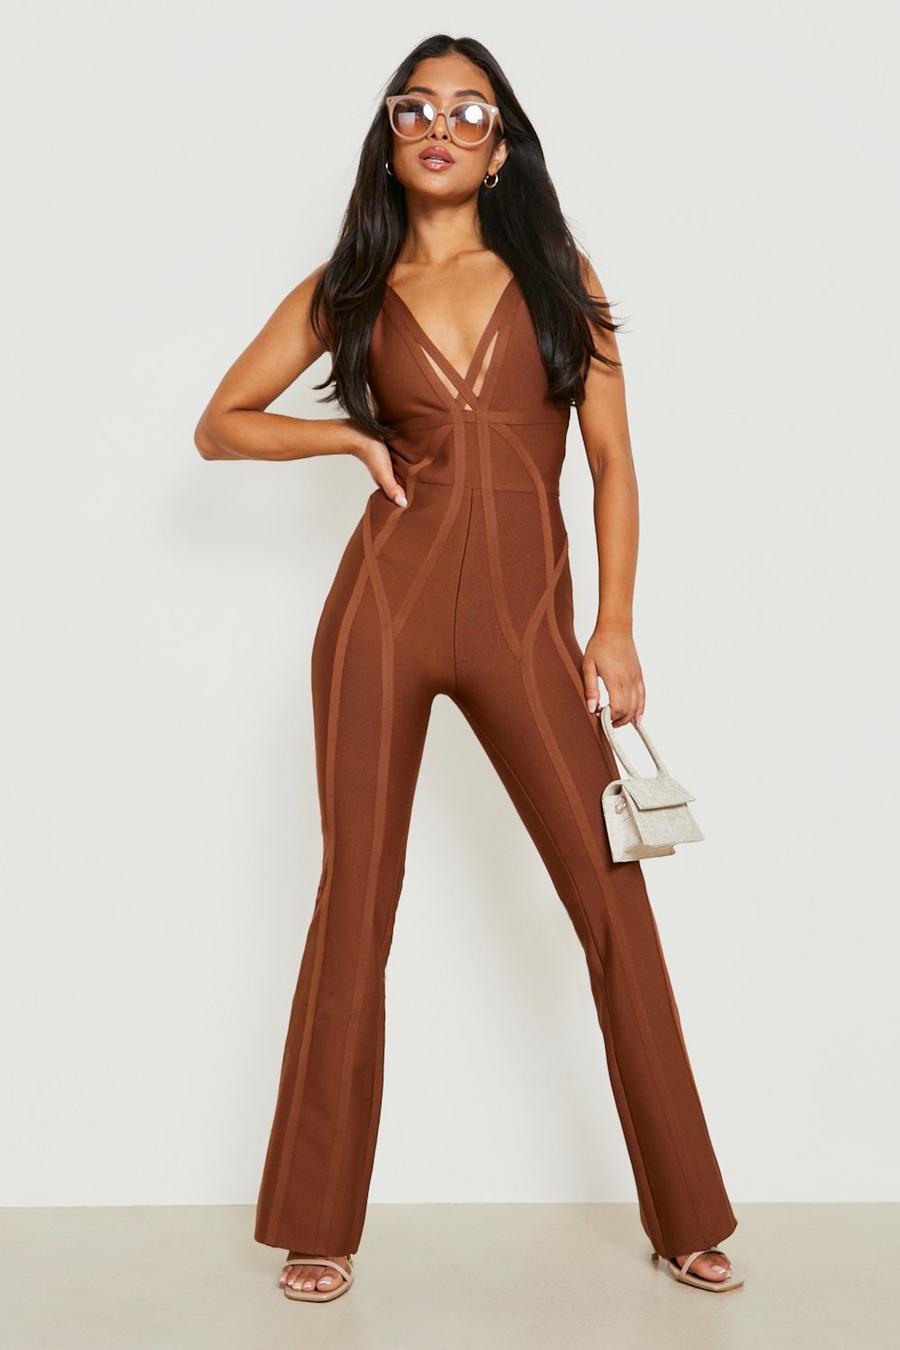 Chocolate brown Petite Bandage Strappy Plunge Flare Jumpsuit